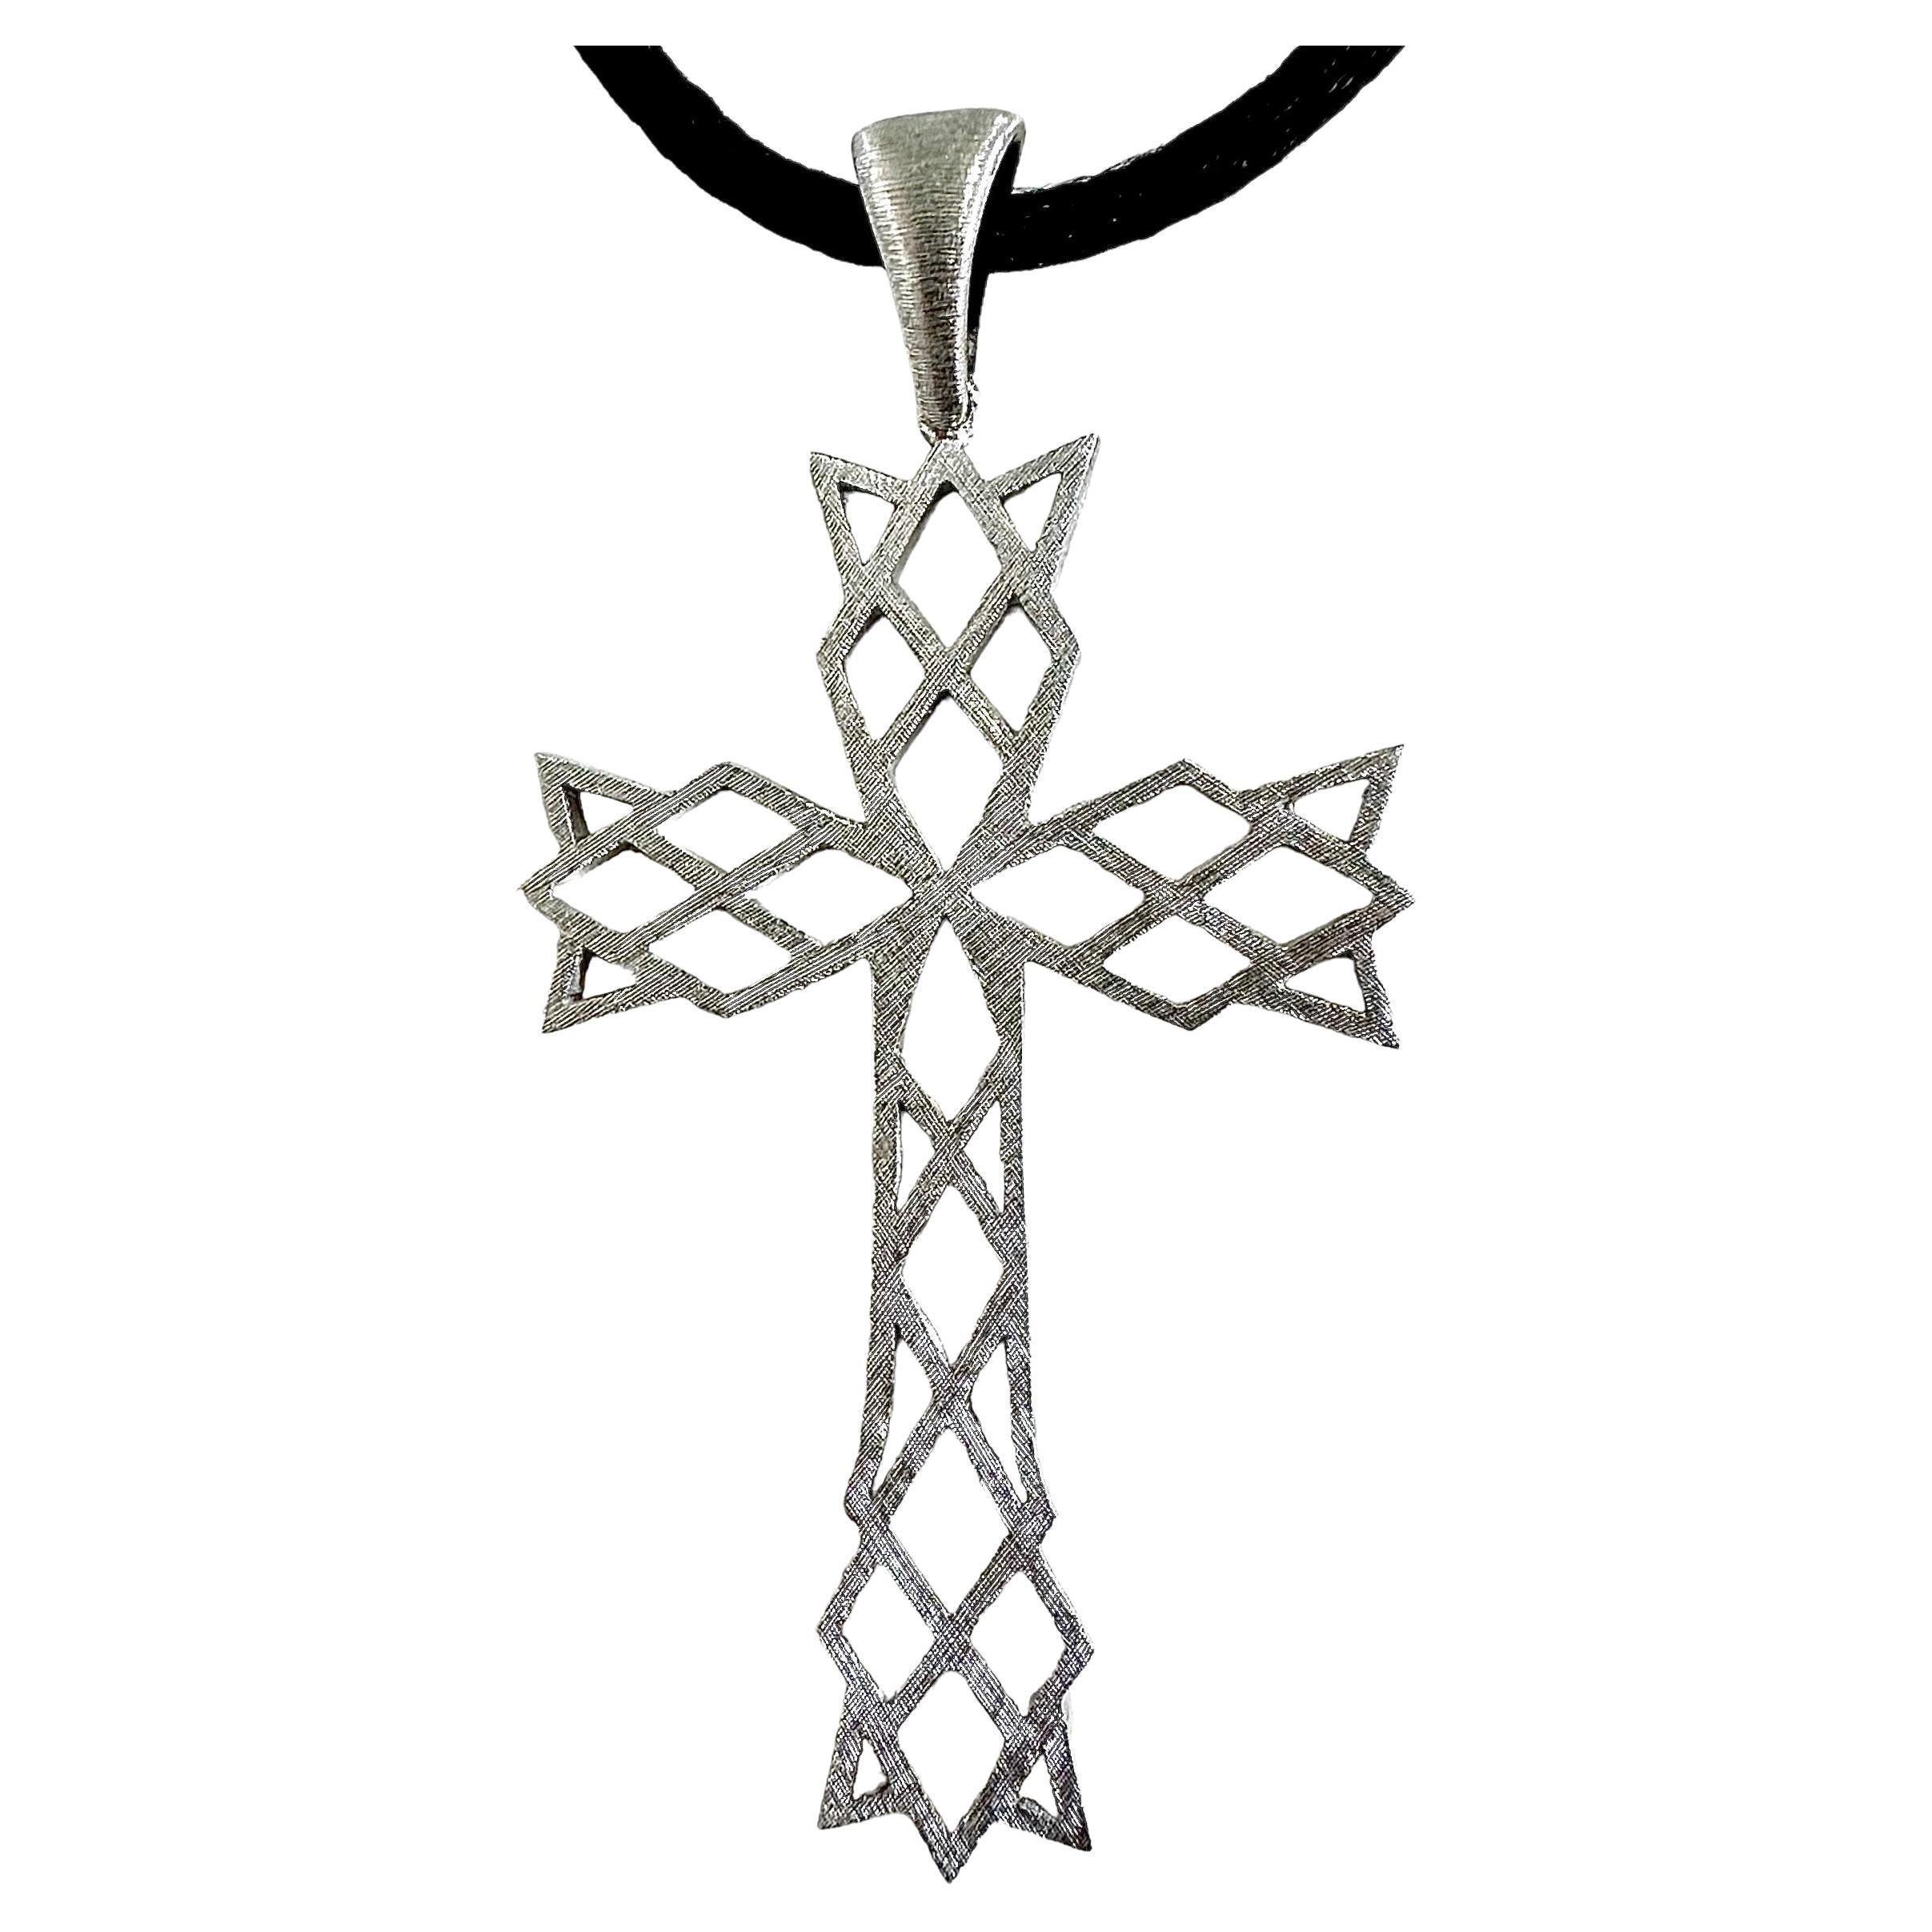 This very unique and architectural M. Bucellatti vintage cross is crafted in 18k white gold and is suspended by a lovely 2mm round black satin, choker length cord. The cord's end cap and lobster clasp are 18k white gold. Every surface of this